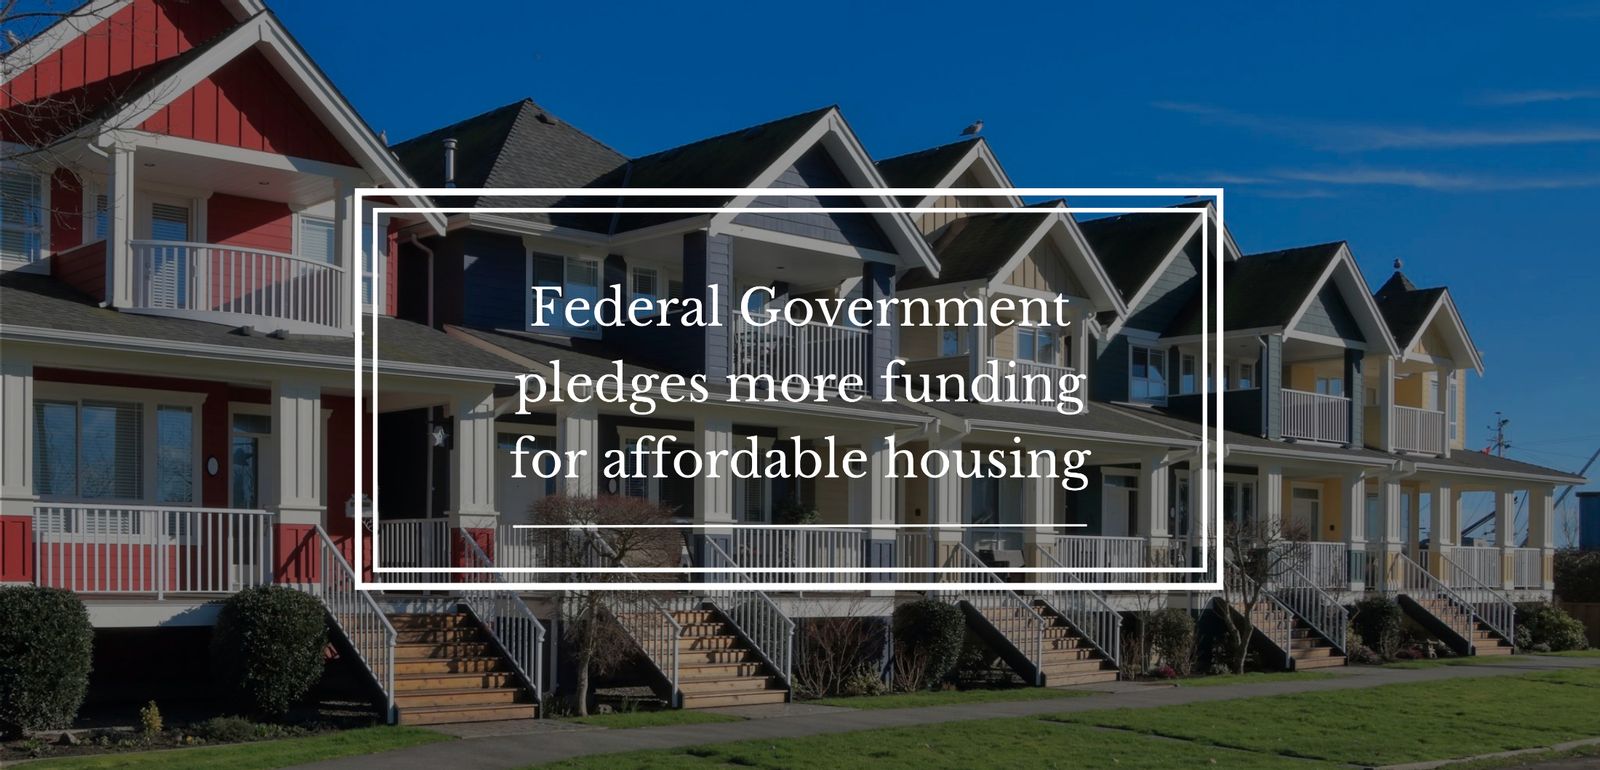 Federal Government pledges more funding for affordable housing